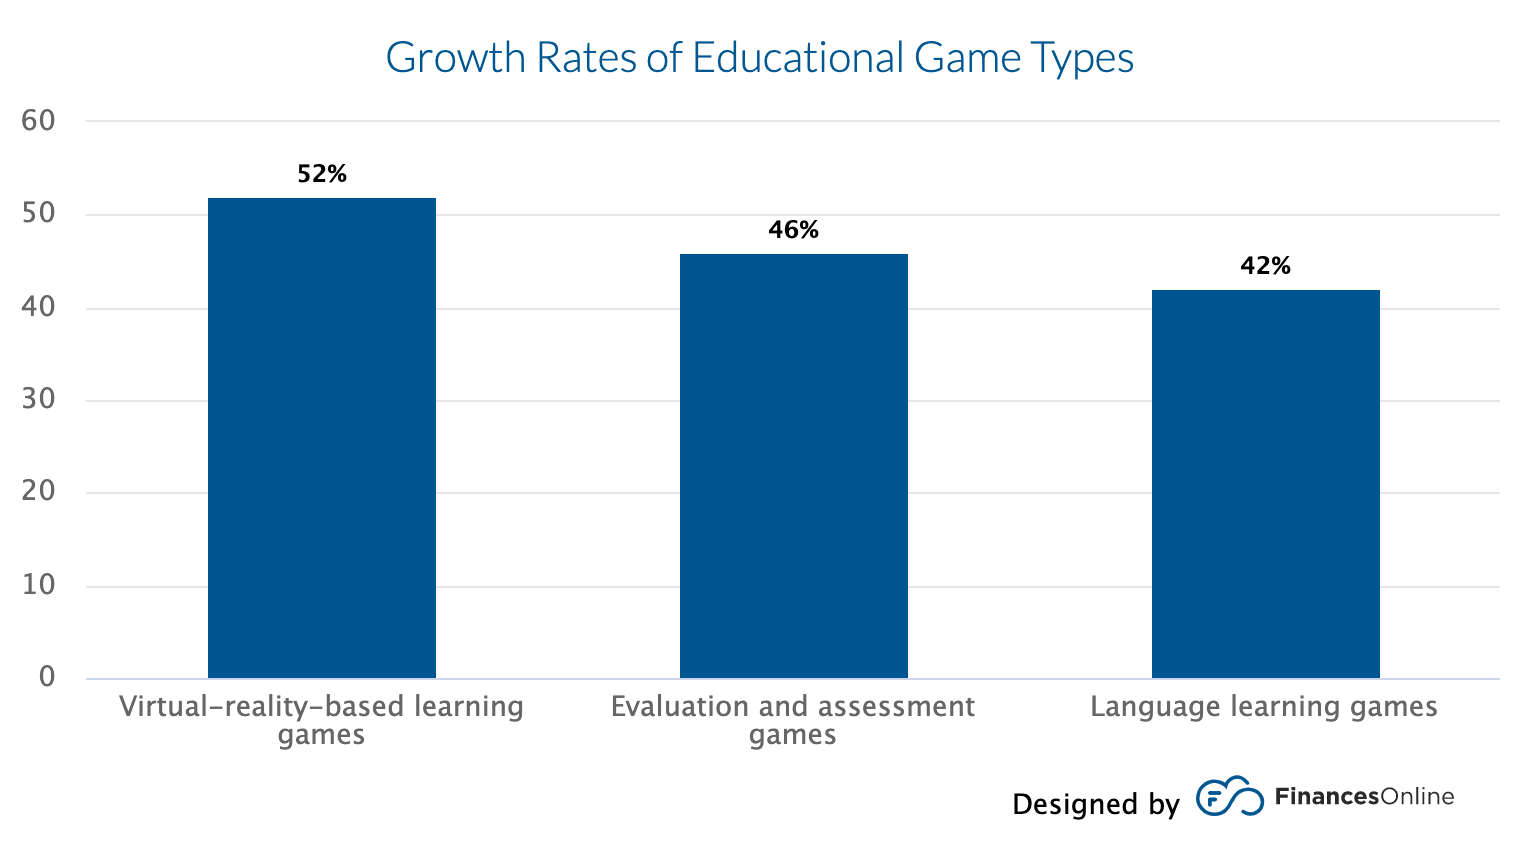 BAGI: Growth Rate of Game-based Educational Apps